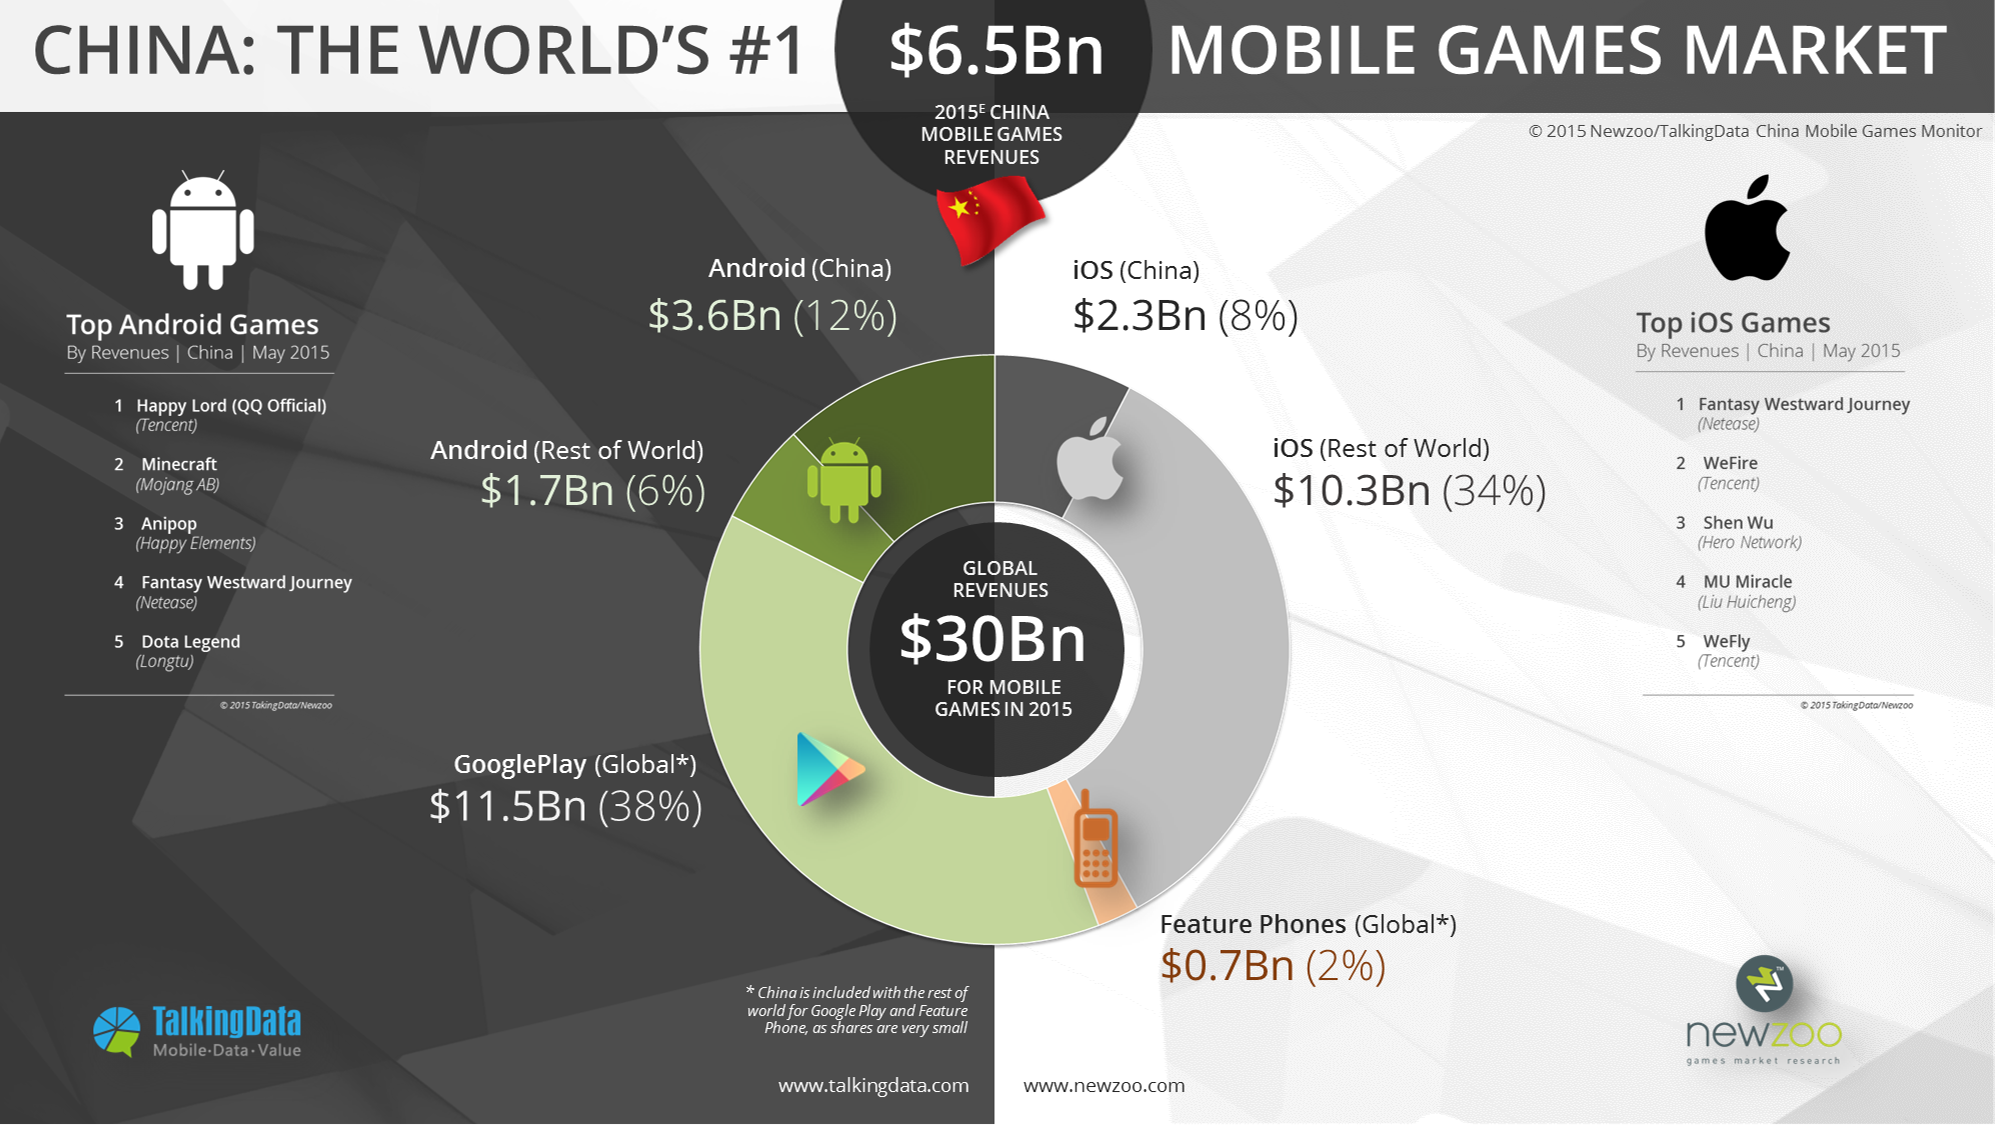 Games mobile com. Mobile games Market. Chinese mobile games. Сравнение IOS И Android. Монетизация игр.